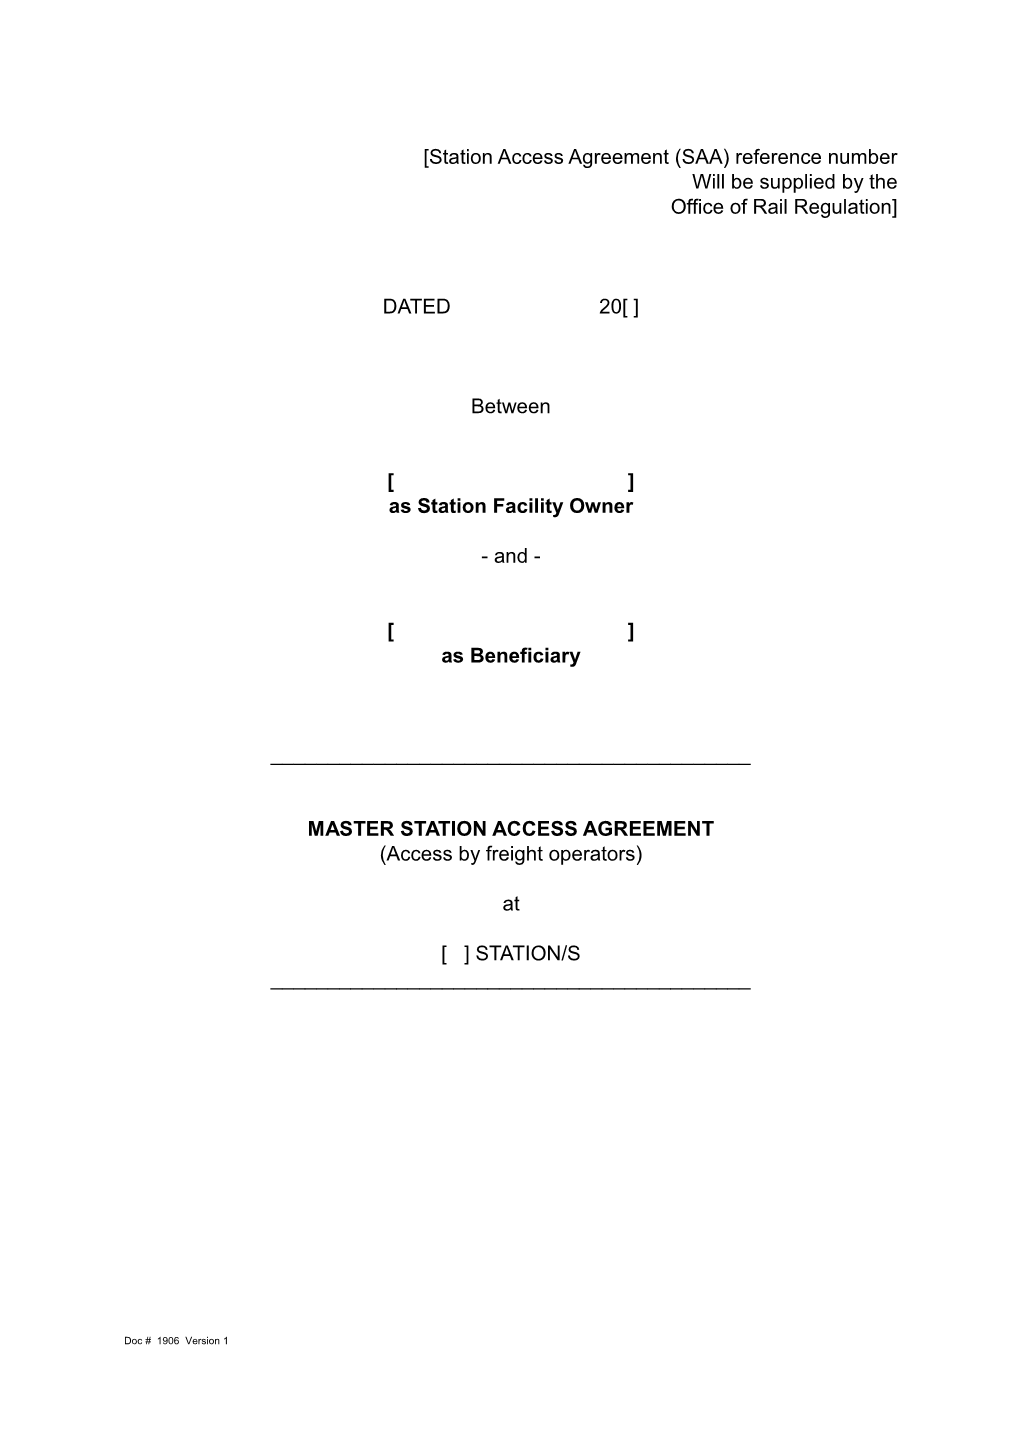 Station Access Agreement (Access by Freight Operators)